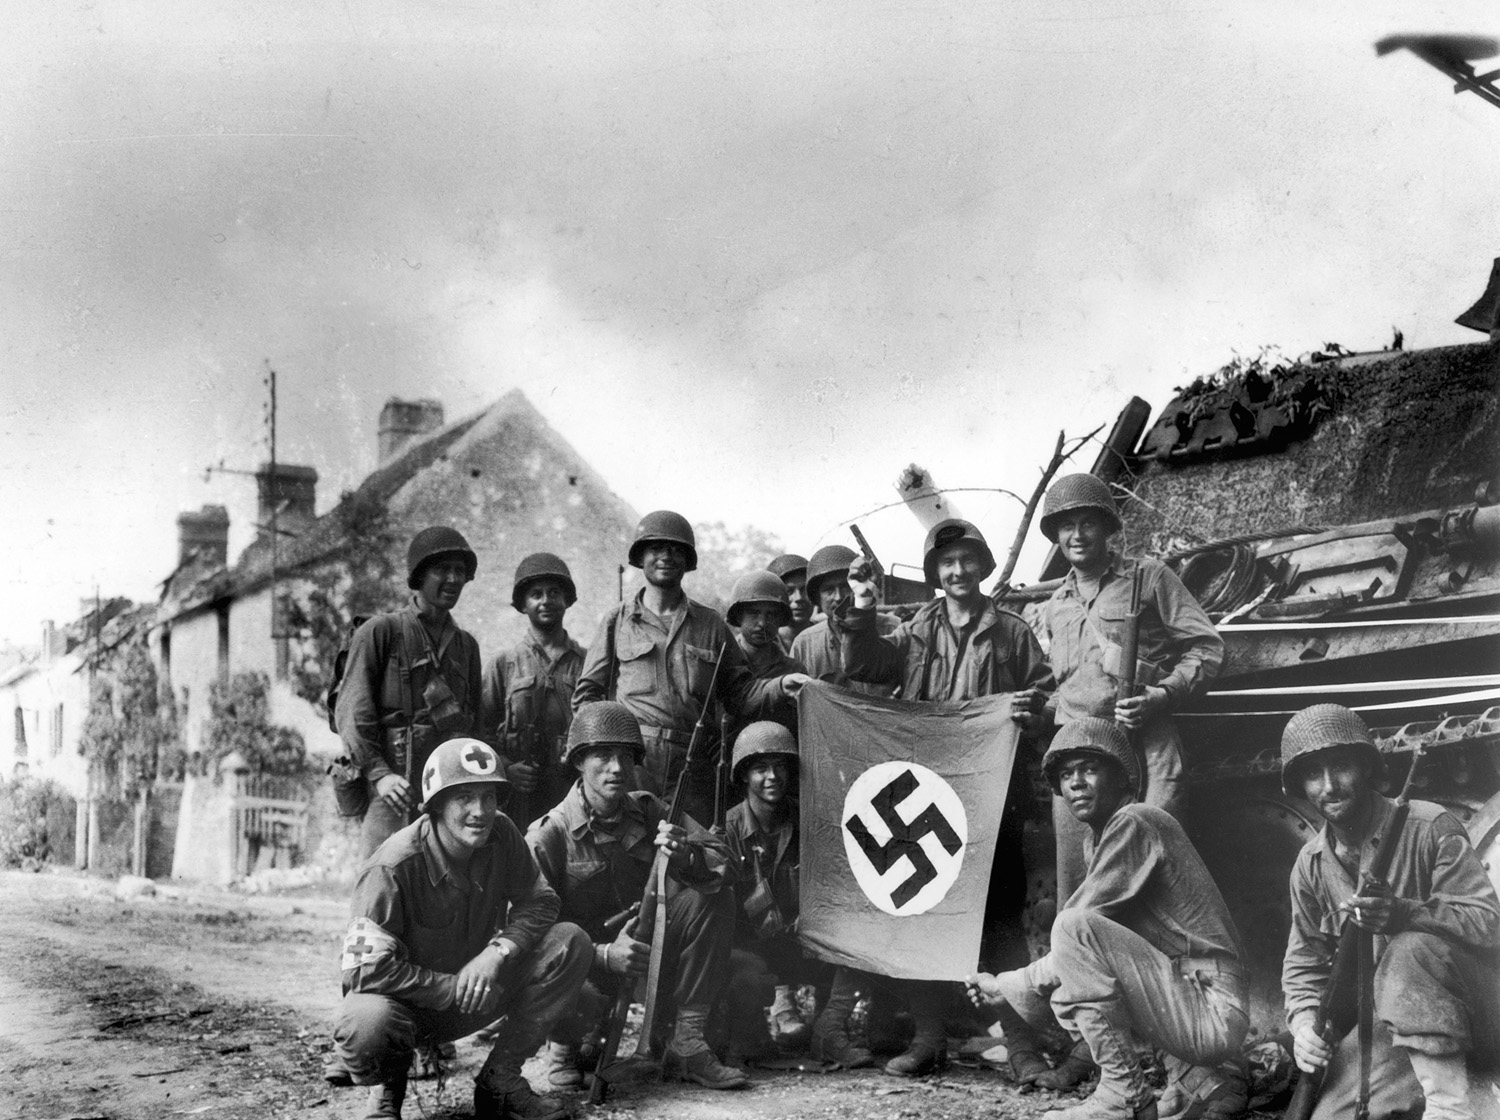 American infantrymen, left behind to mop up last stronghold of Nazis in Falaise Gap area of northwestern France, line up in front of wrecked German tank with a captured swastika flag, 1944.